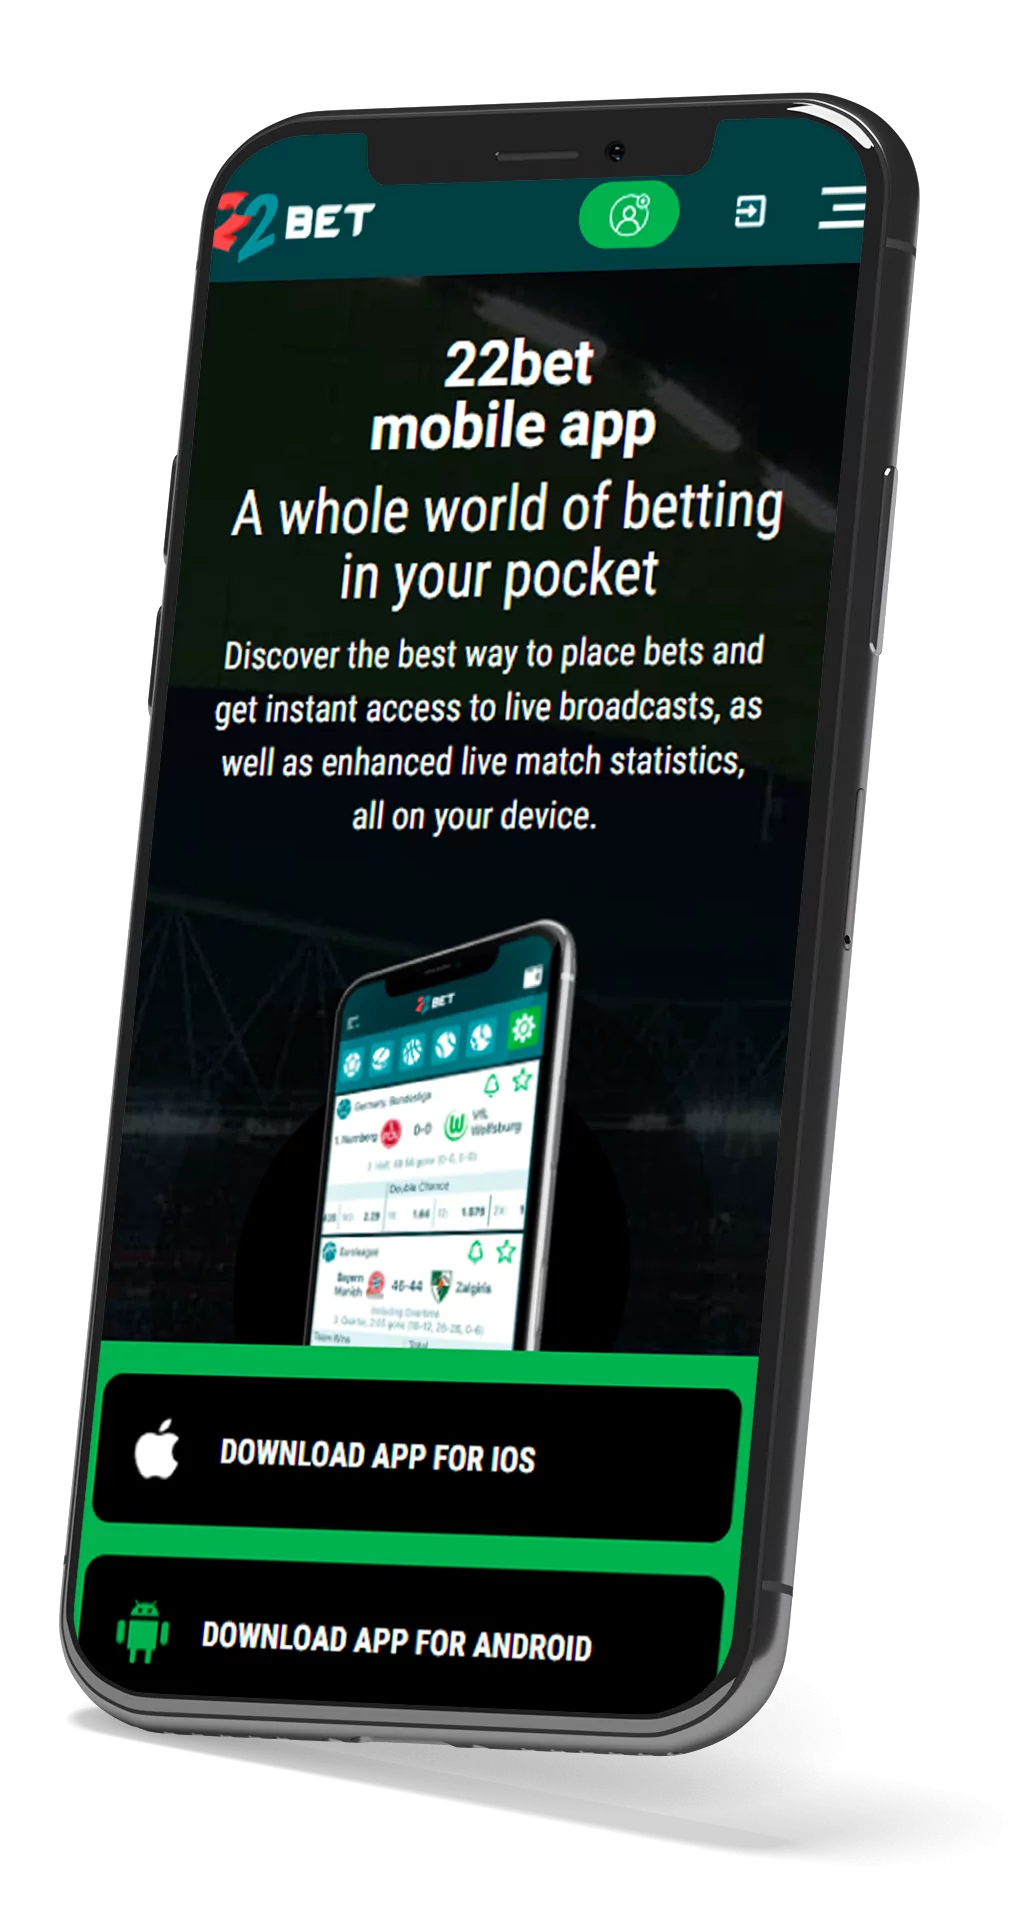 Step 1: Find and download 22bet app apk file at the official website.